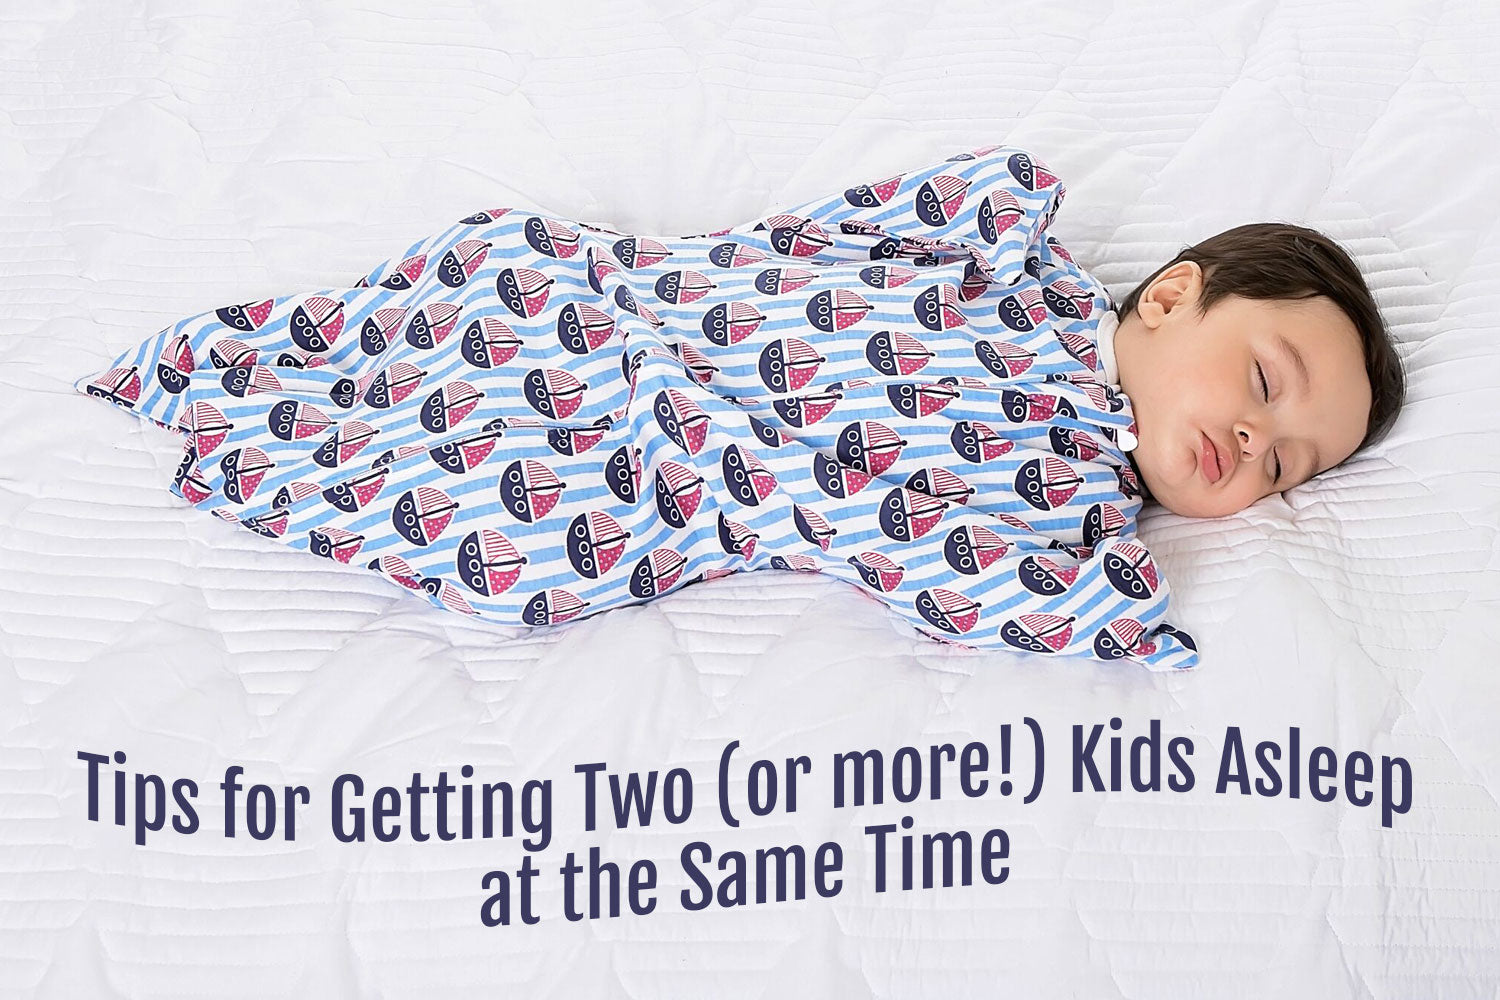 Getting two or more children to sleep at the same time